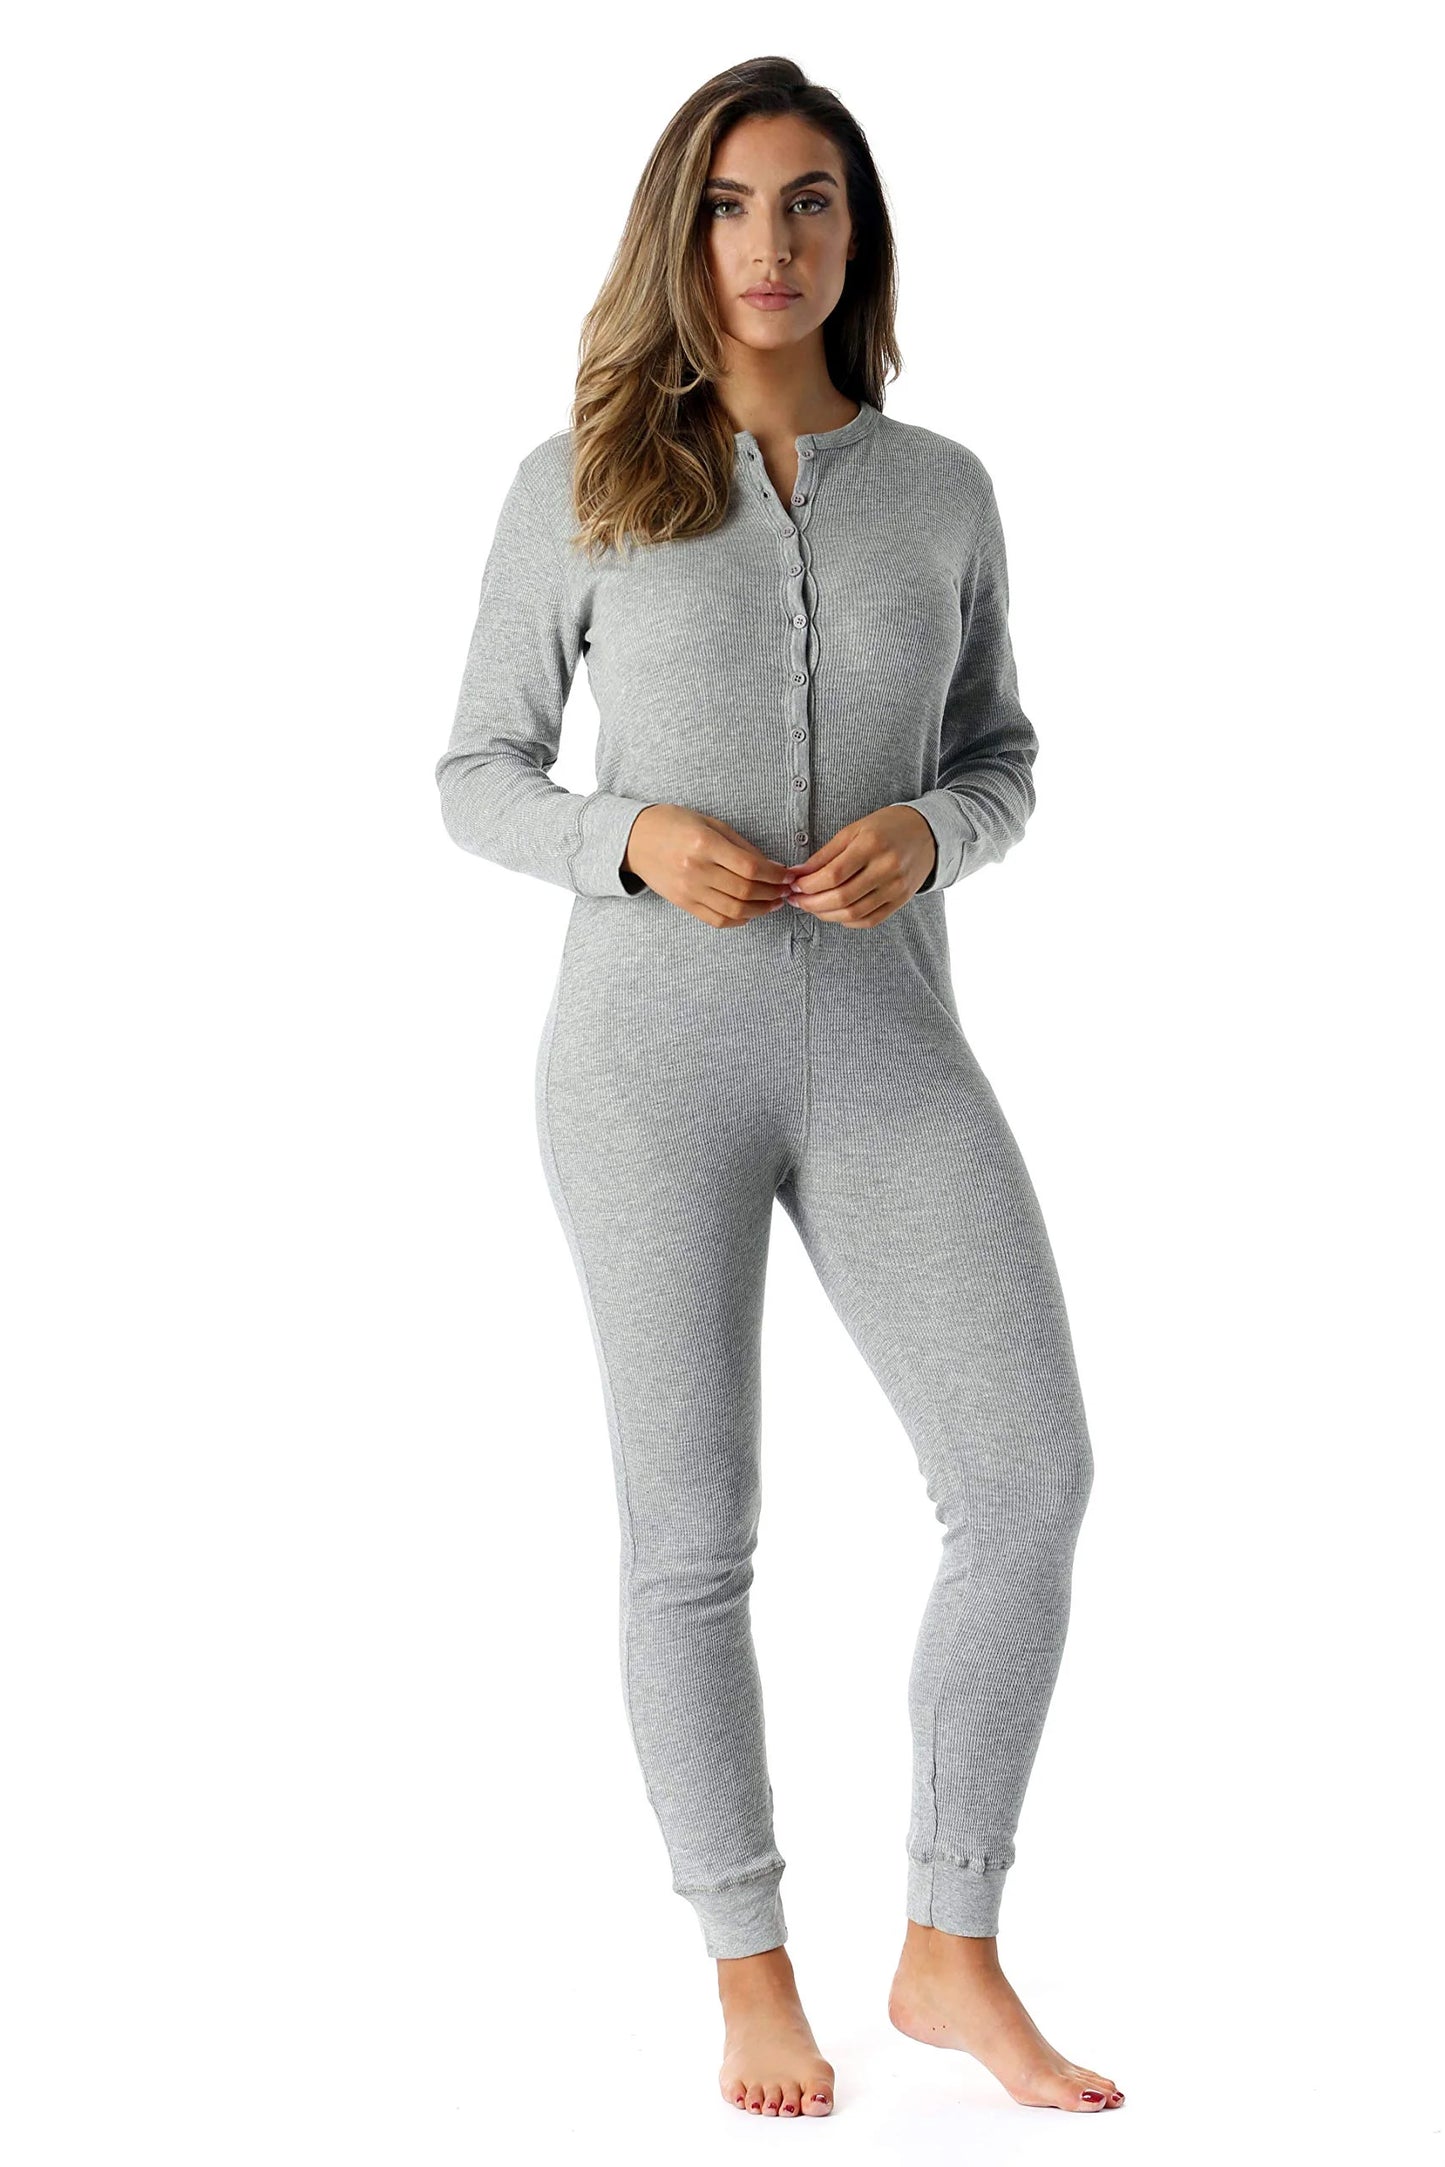 #followme Women's Thermal Henley Onesie - Soft and Cozy Union Suit for Winter Sleepwear and Lounging (Grey, X-large)